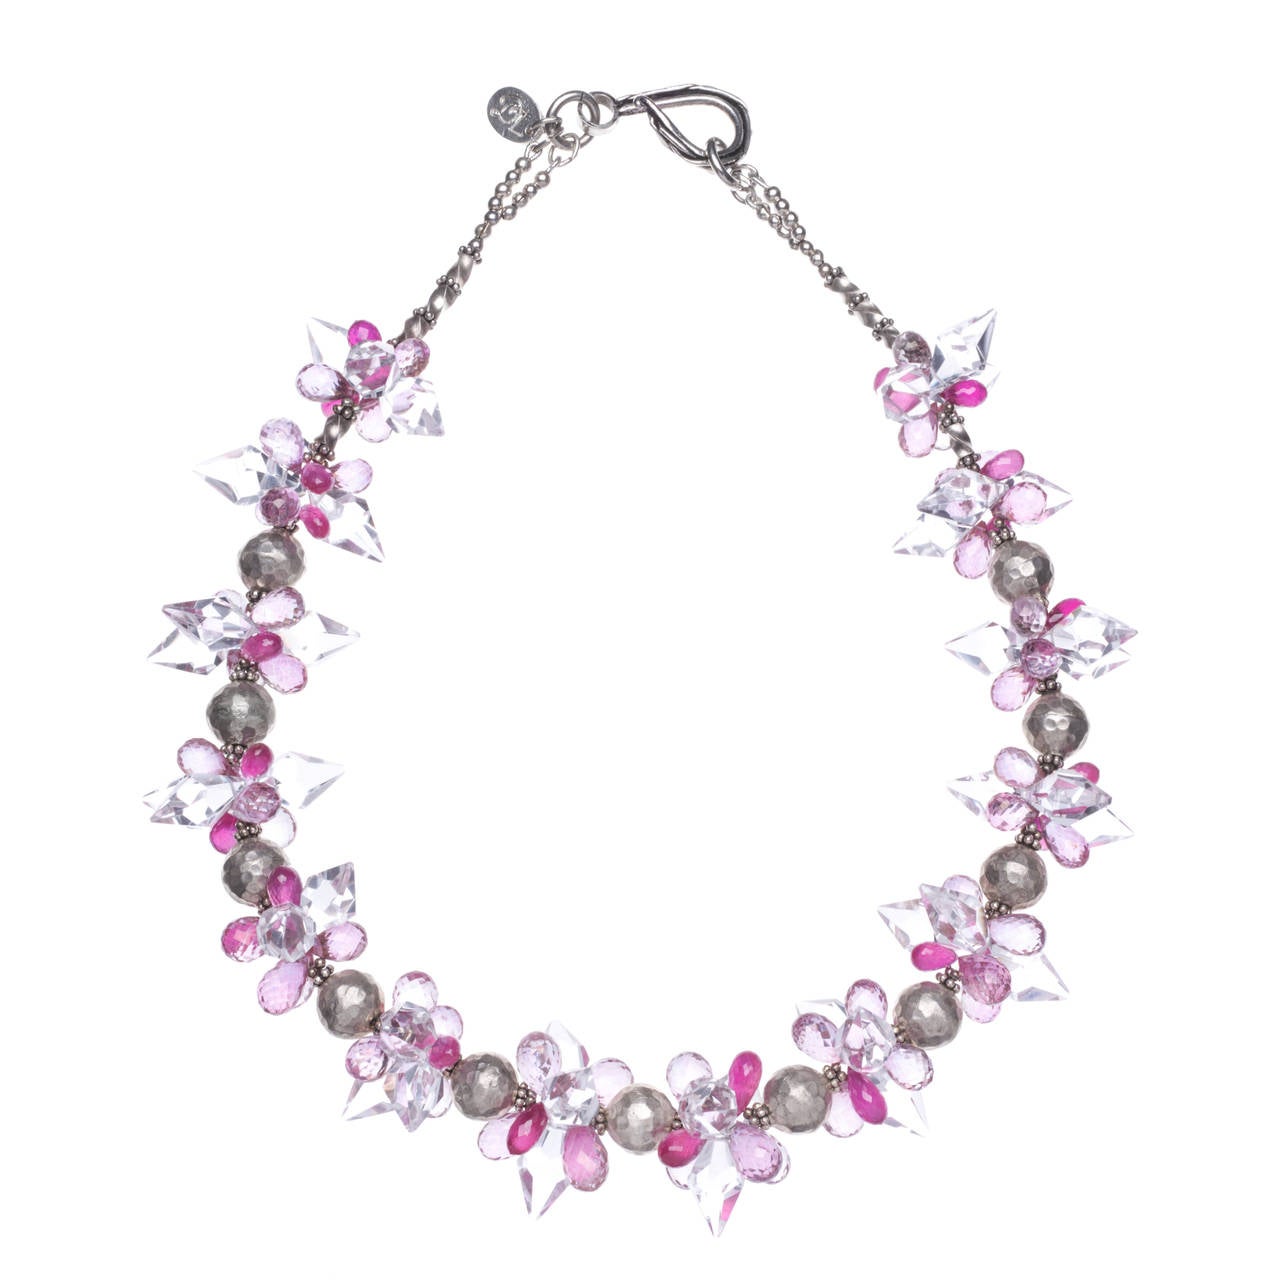 Crystal Quartz, Pink Topaz and Rubies Necklace in Sterling Silver